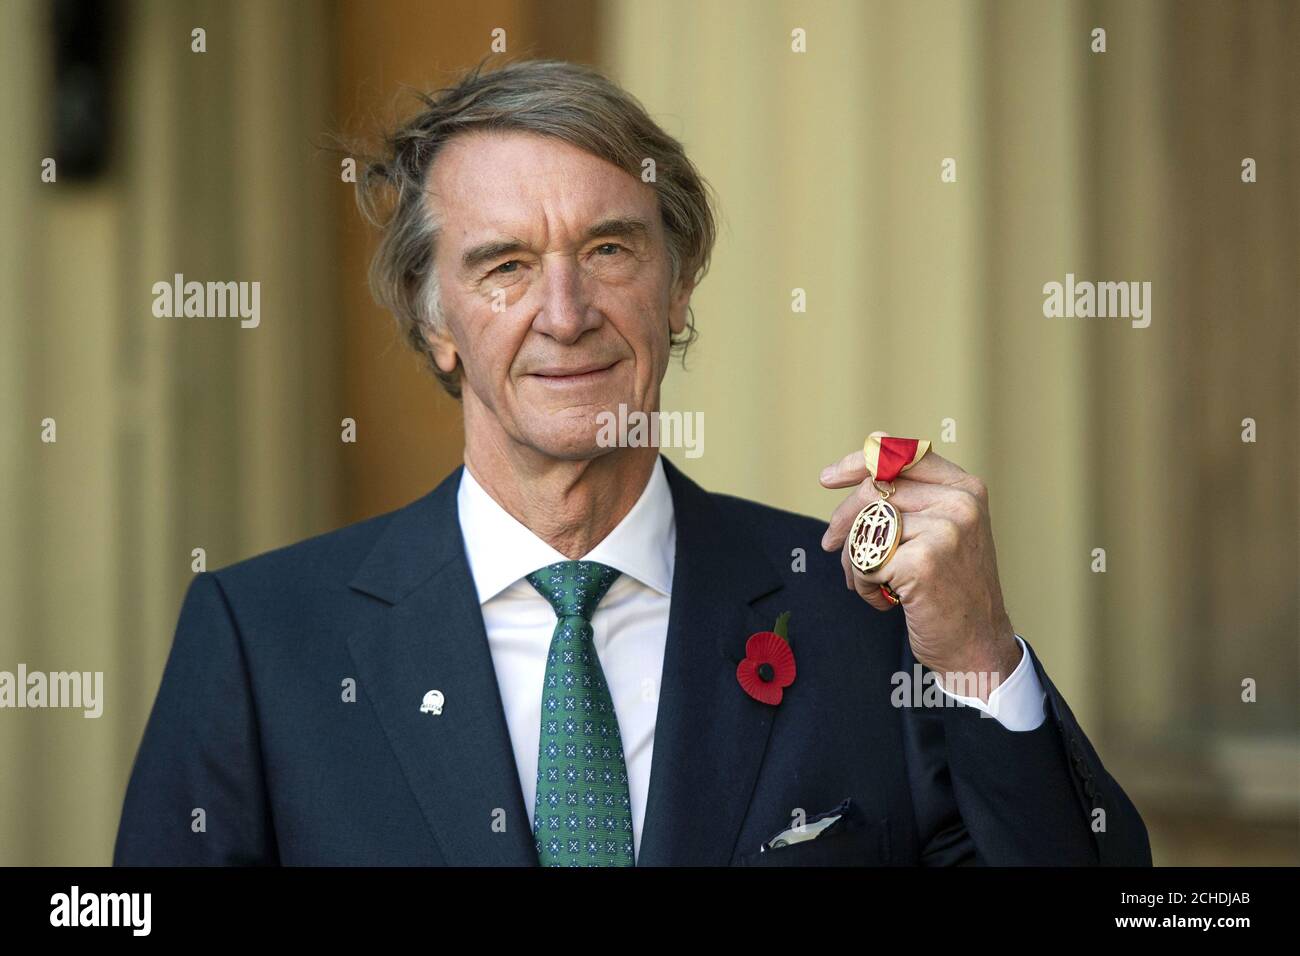 Sir James Ratcliffe, Chairman and Chief Executive Officer of Ineos Chemicals Group, after receiving the Honour of Knighthood for services to business and investment in an Investiture ceremony at Buckingham Palace, London. Stock Photo